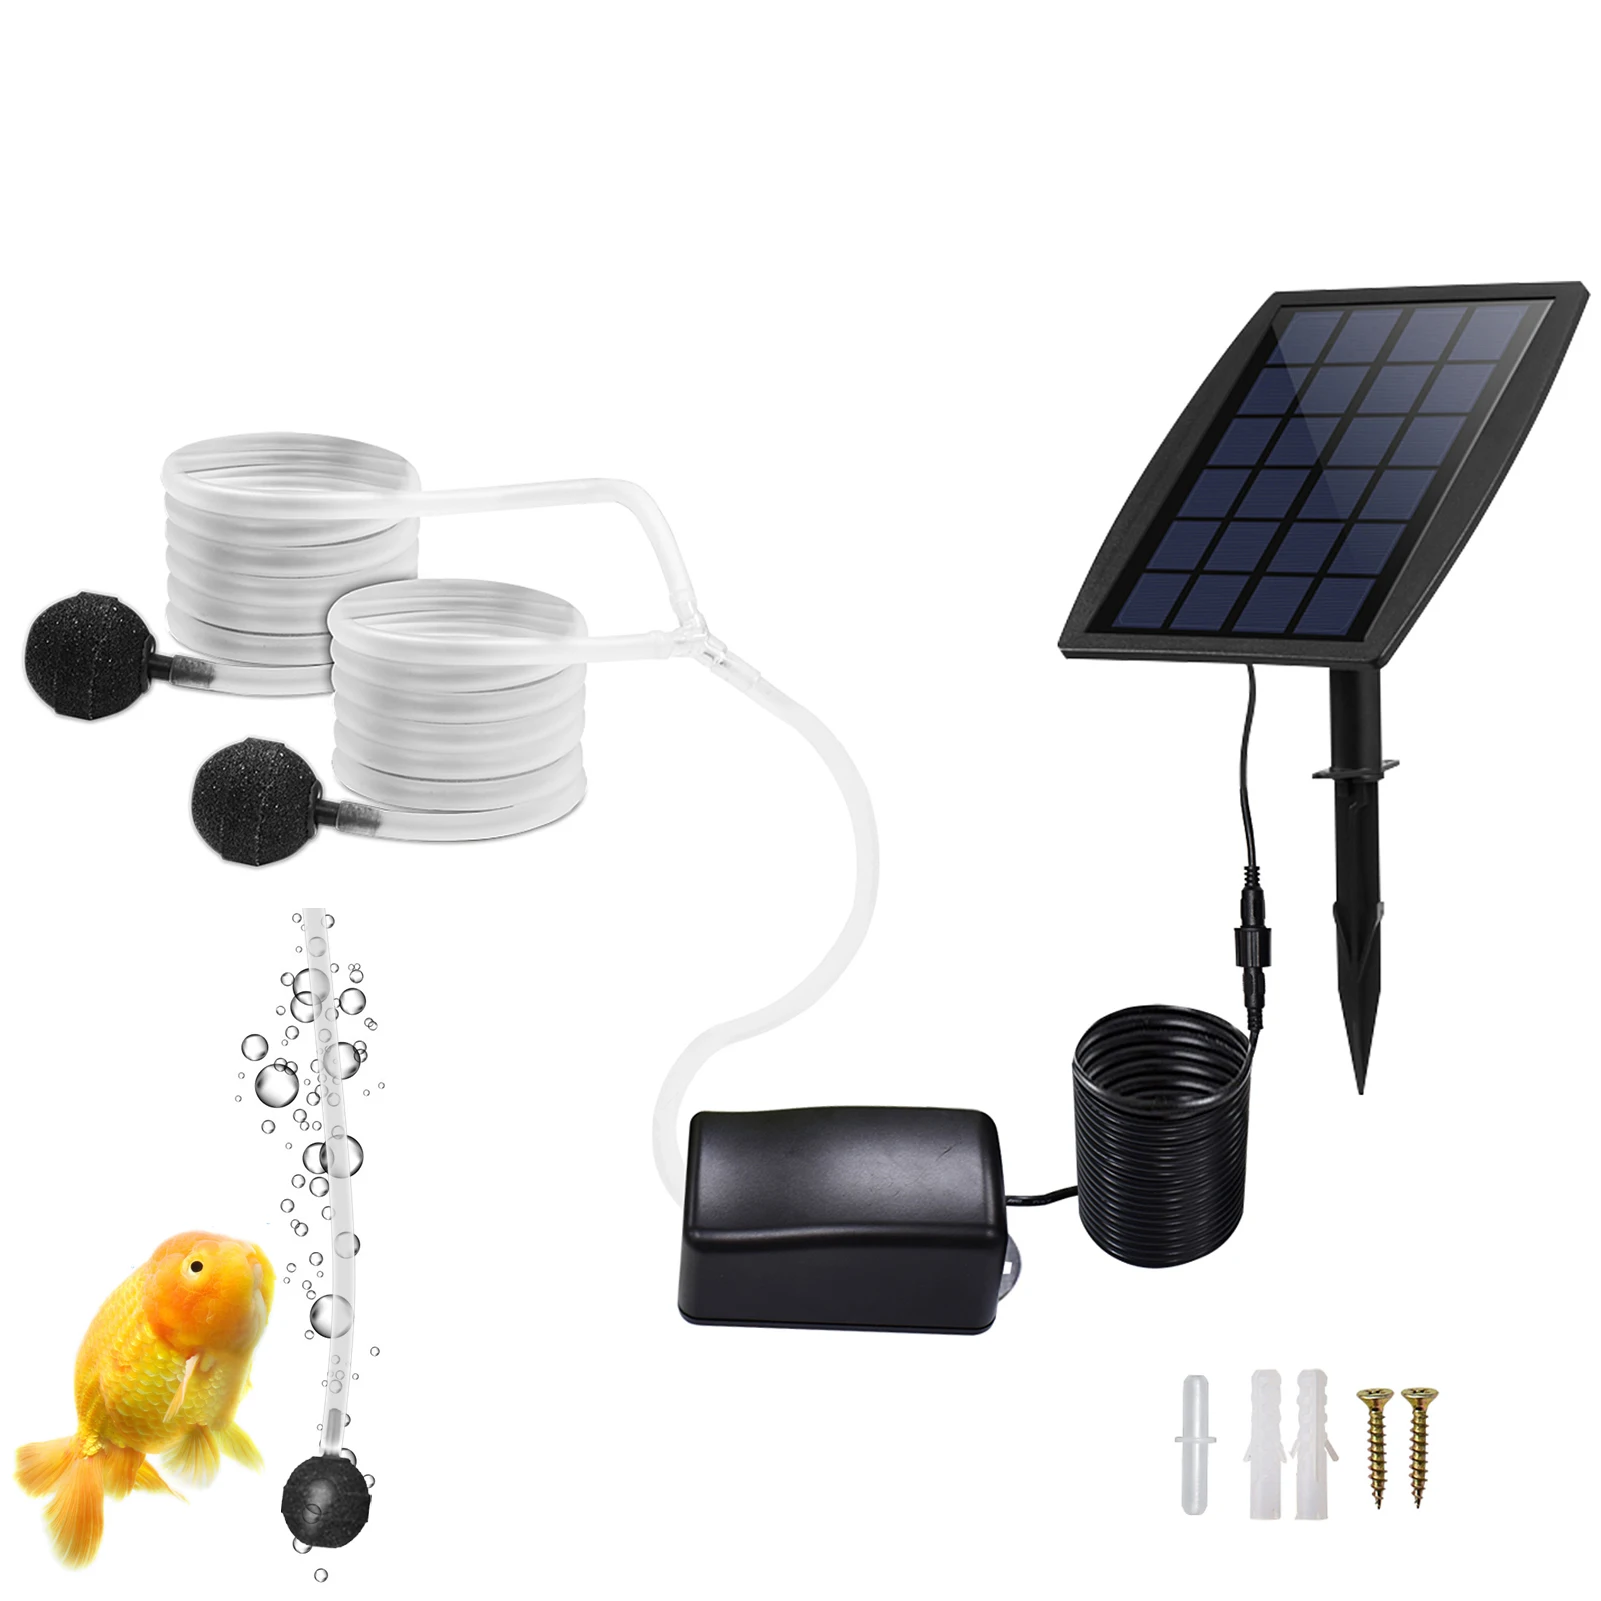 

Pond Aerator Solar Powered Air Pump Kit 2.5w Air Pump With Air Hoses And Bubble Stones 3 Working Modes Pond Aerator Oxygenator